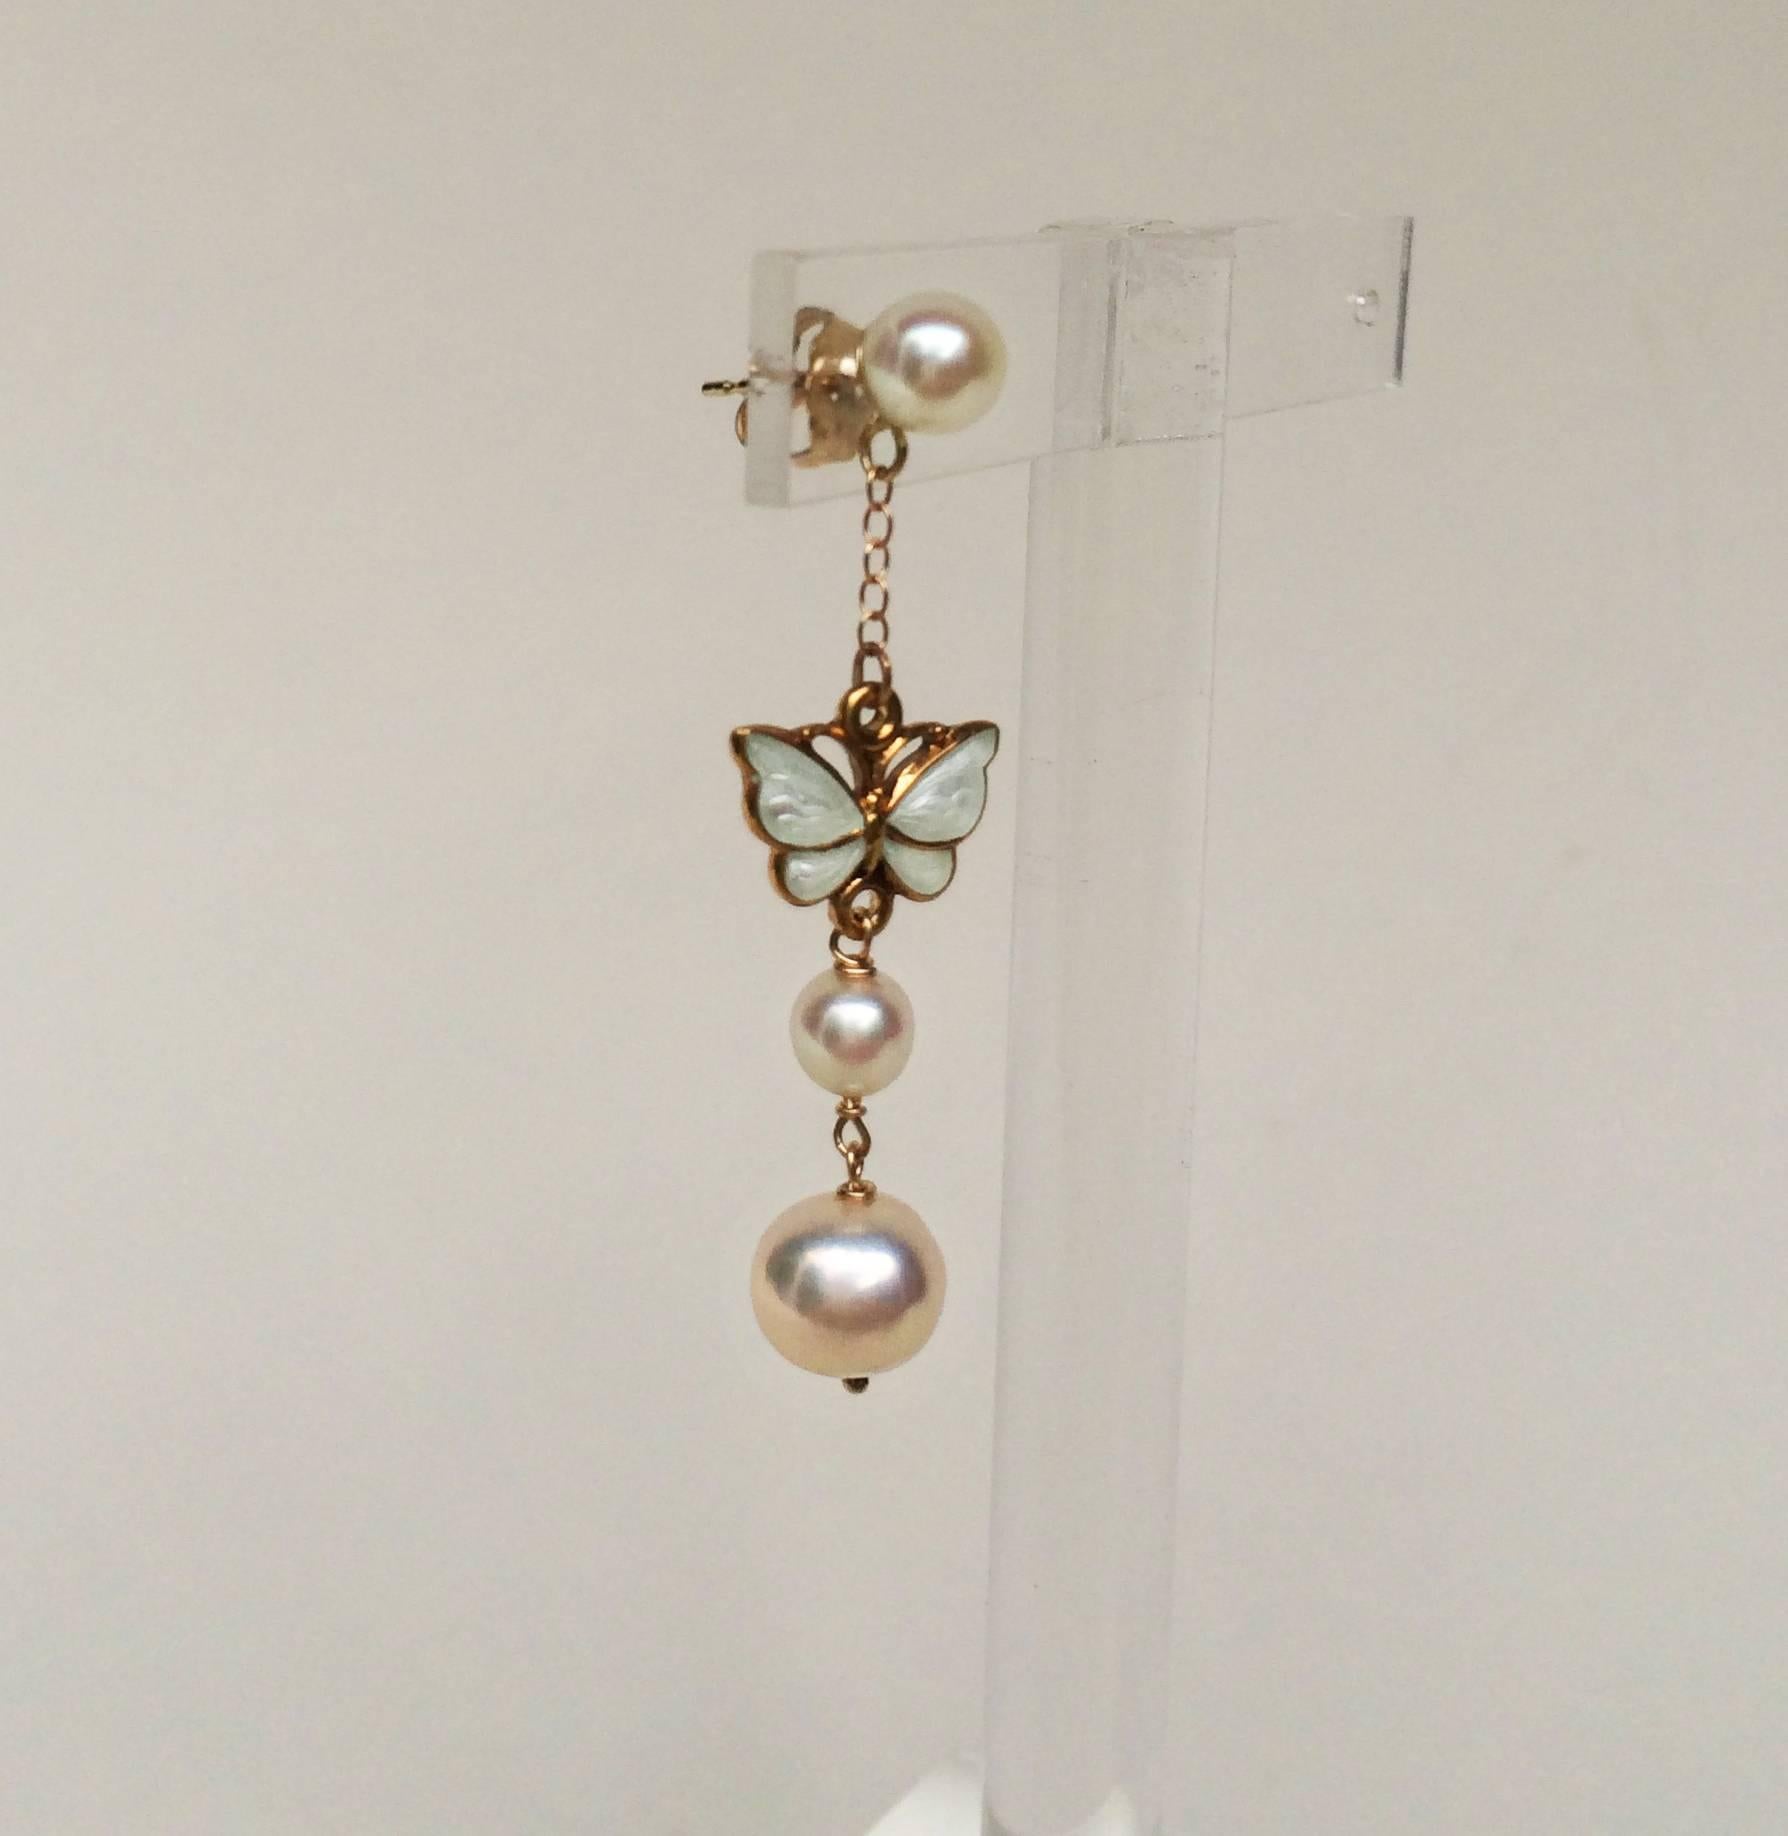 These earrings are perfect for a beautiful day out. A vintage butterfly (c.1950s) with fine white enamel hangs from a 14k gold chain and round pearl (5mm). The earring is finished with a small and a large pearl (5 and 6 mm respectively). The